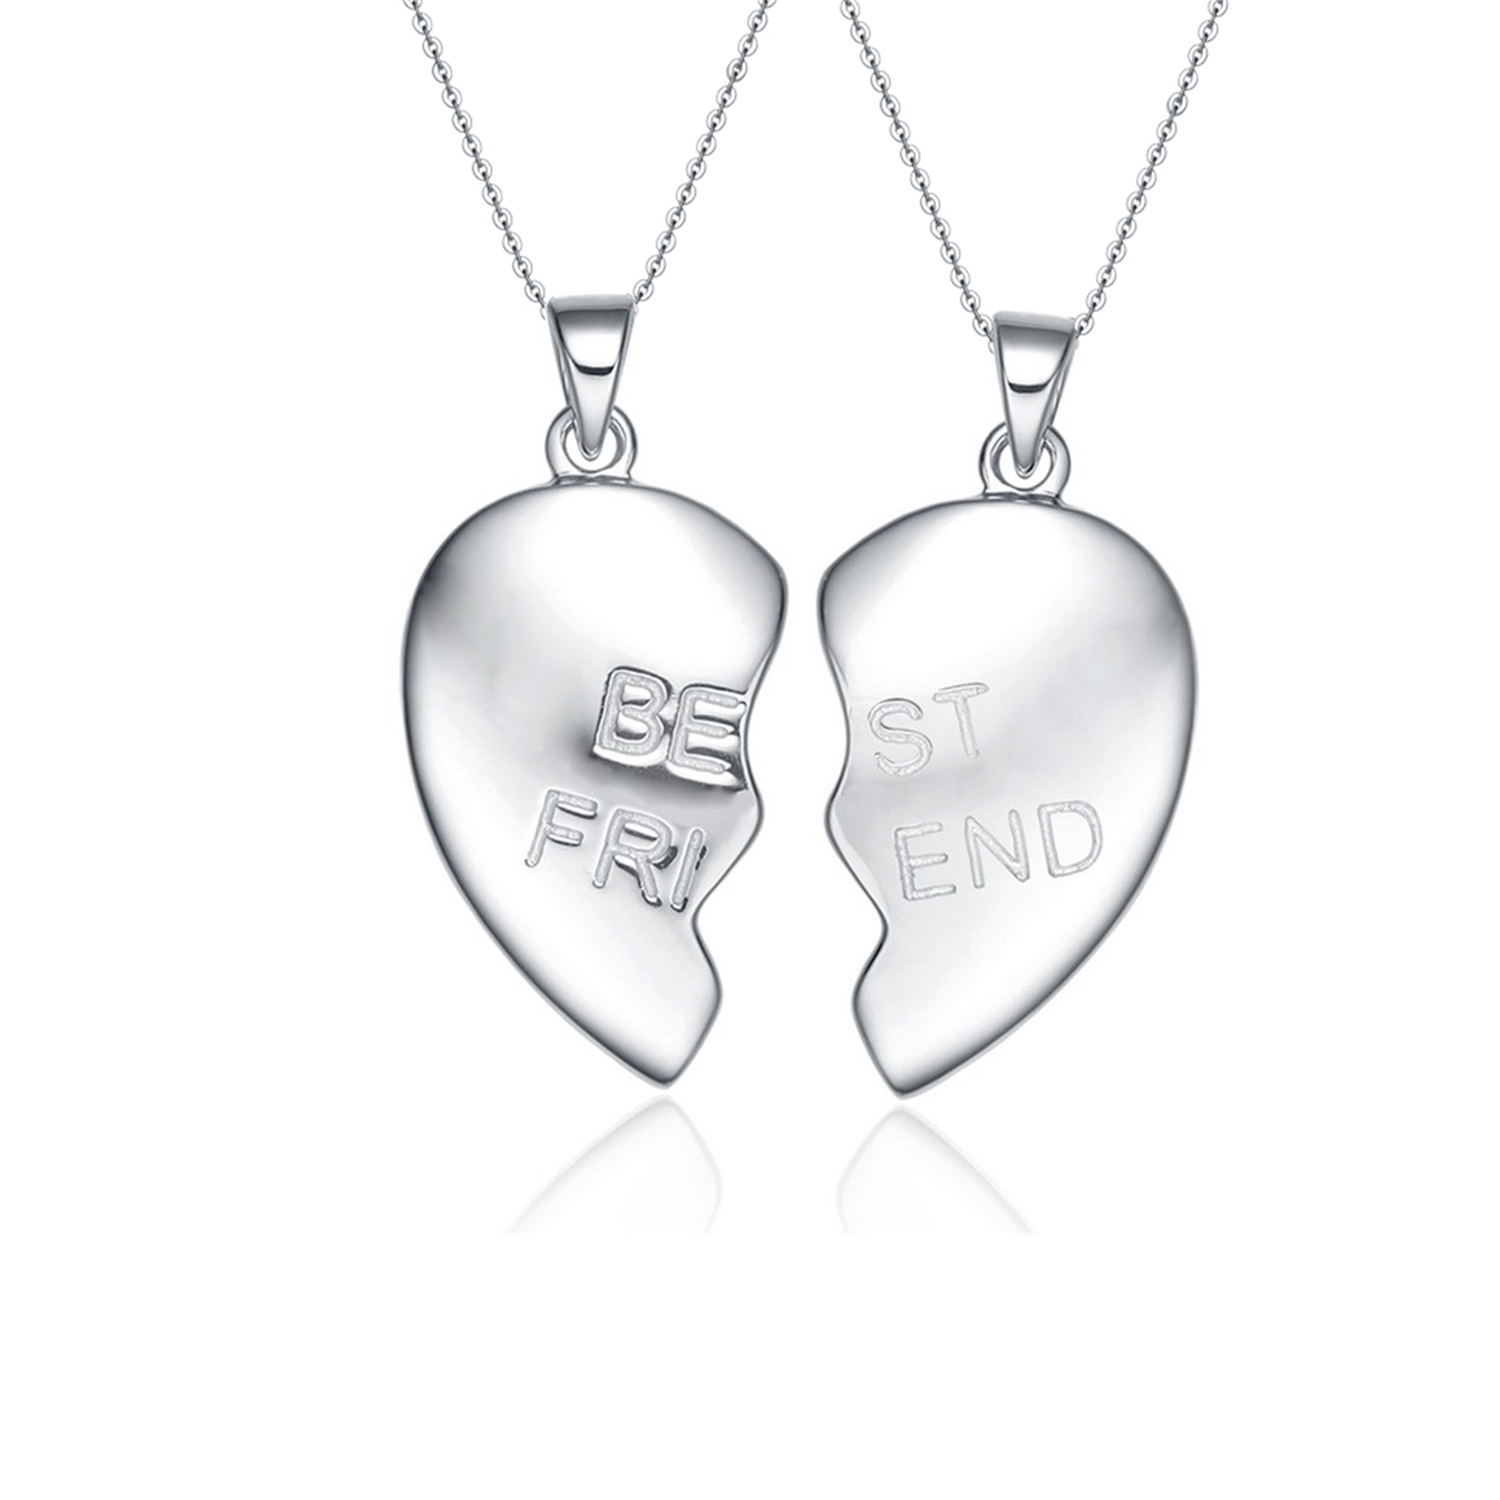 Customized Name Engraved Friendship jewelry 925 Sterling Silver Couple Broken Heart Pendant Necklace(图4)